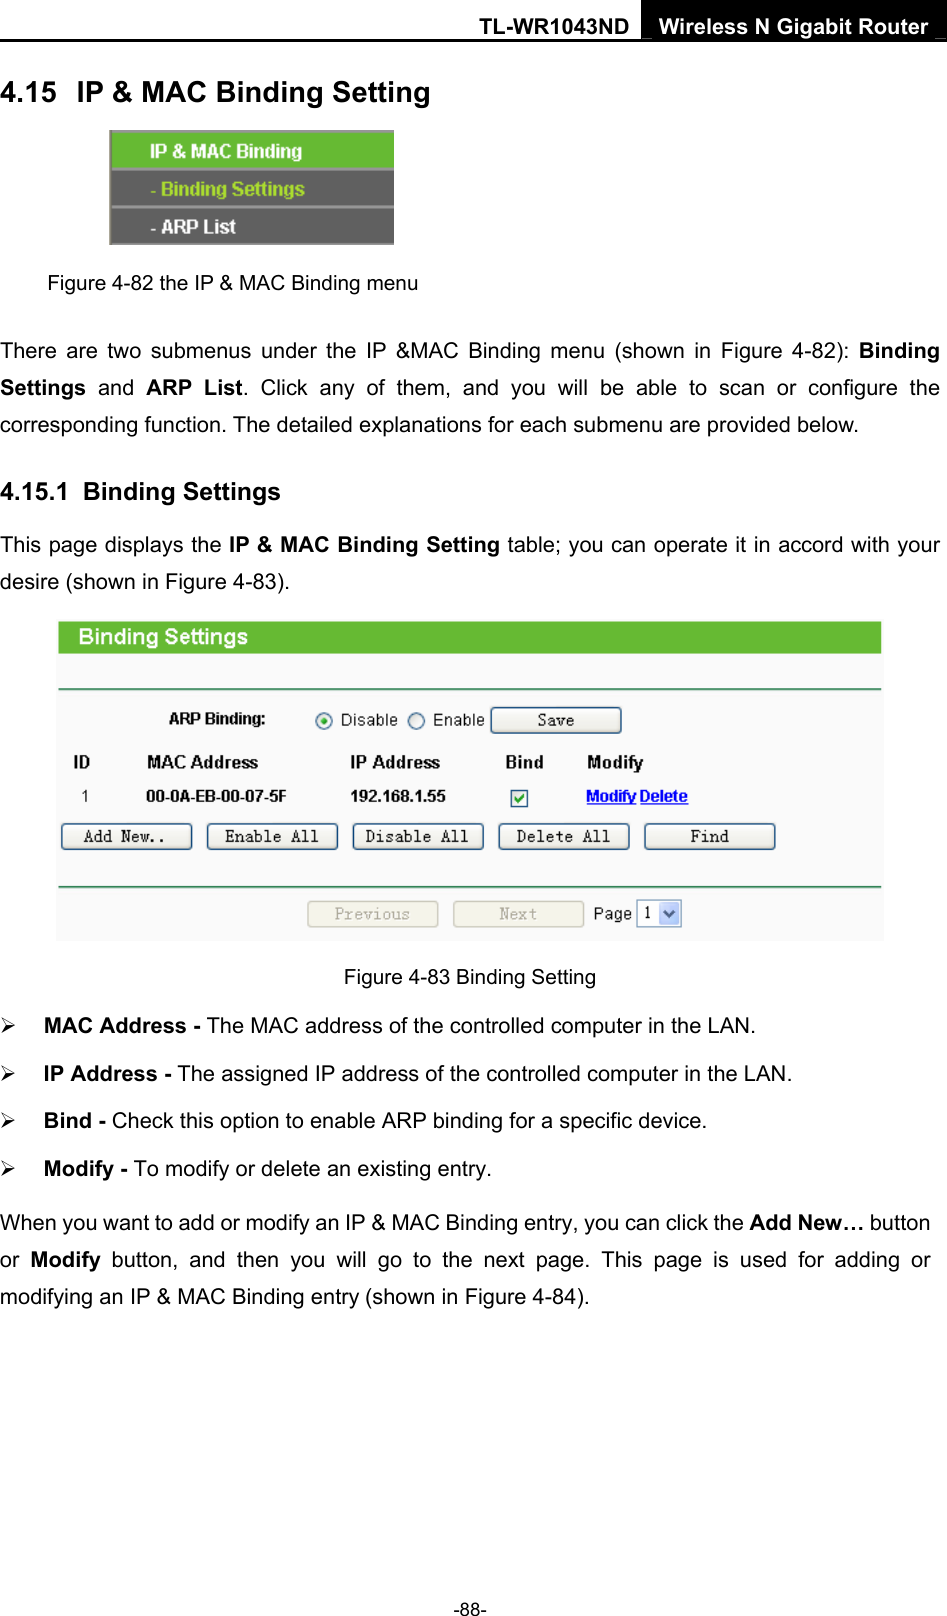 TL-WR1043ND Wireless N Gigabit Router  -88- 4.15  IP &amp; MAC Binding Setting  Figure 4-82 the IP &amp; MAC Binding menu There are two submenus under the IP &amp;MAC Binding menu (shown in Figure 4-82): Binding Settings  and ARP List. Click any of them, and you will be able to scan or configure the corresponding function. The detailed explanations for each submenu are provided below. 4.15.1  Binding Settings This page displays the IP &amp; MAC Binding Setting table; you can operate it in accord with your desire (shown in Figure 4-83).    Figure 4-83 Binding Setting ¾ MAC Address - The MAC address of the controlled computer in the LAN.   ¾ IP Address - The assigned IP address of the controlled computer in the LAN.   ¾ Bind - Check this option to enable ARP binding for a specific device.   ¾ Modify - To modify or delete an existing entry.   When you want to add or modify an IP &amp; MAC Binding entry, you can click the Add New… button or  Modify button, and then you will go to the next page. This page is used for adding or modifying an IP &amp; MAC Binding entry (shown in Figure 4-84).   